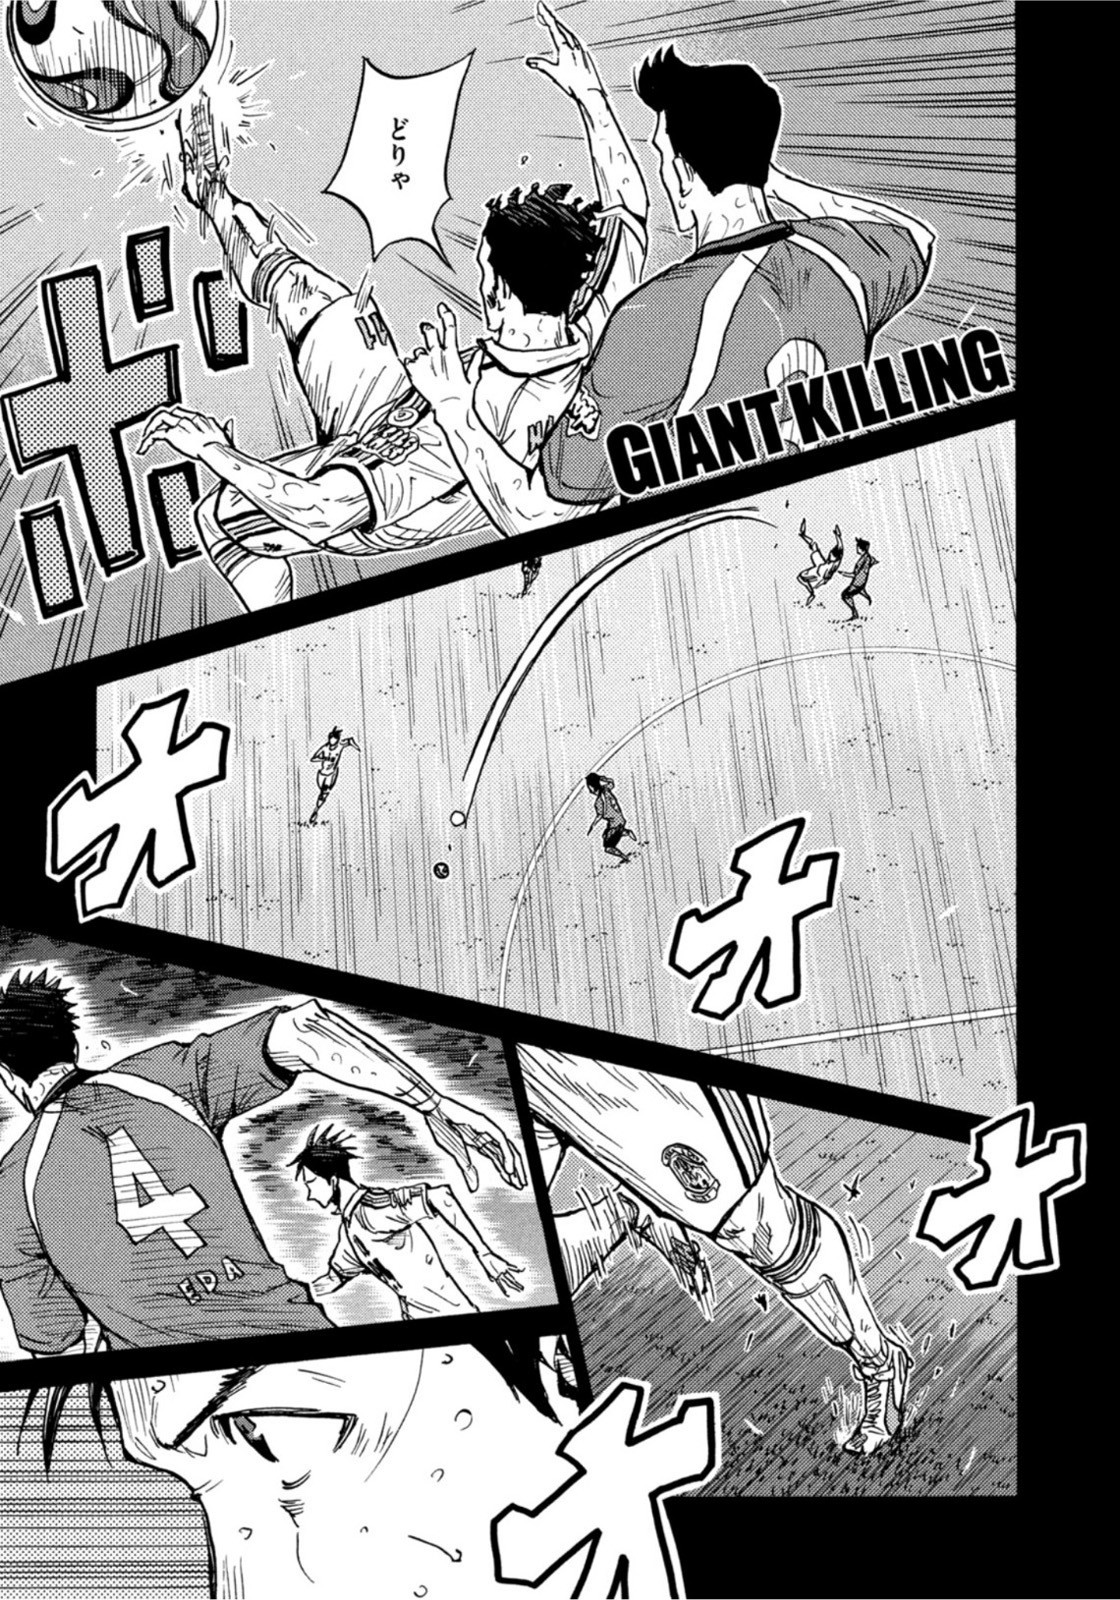 Giant Killing - Chapter 614 - Page 1